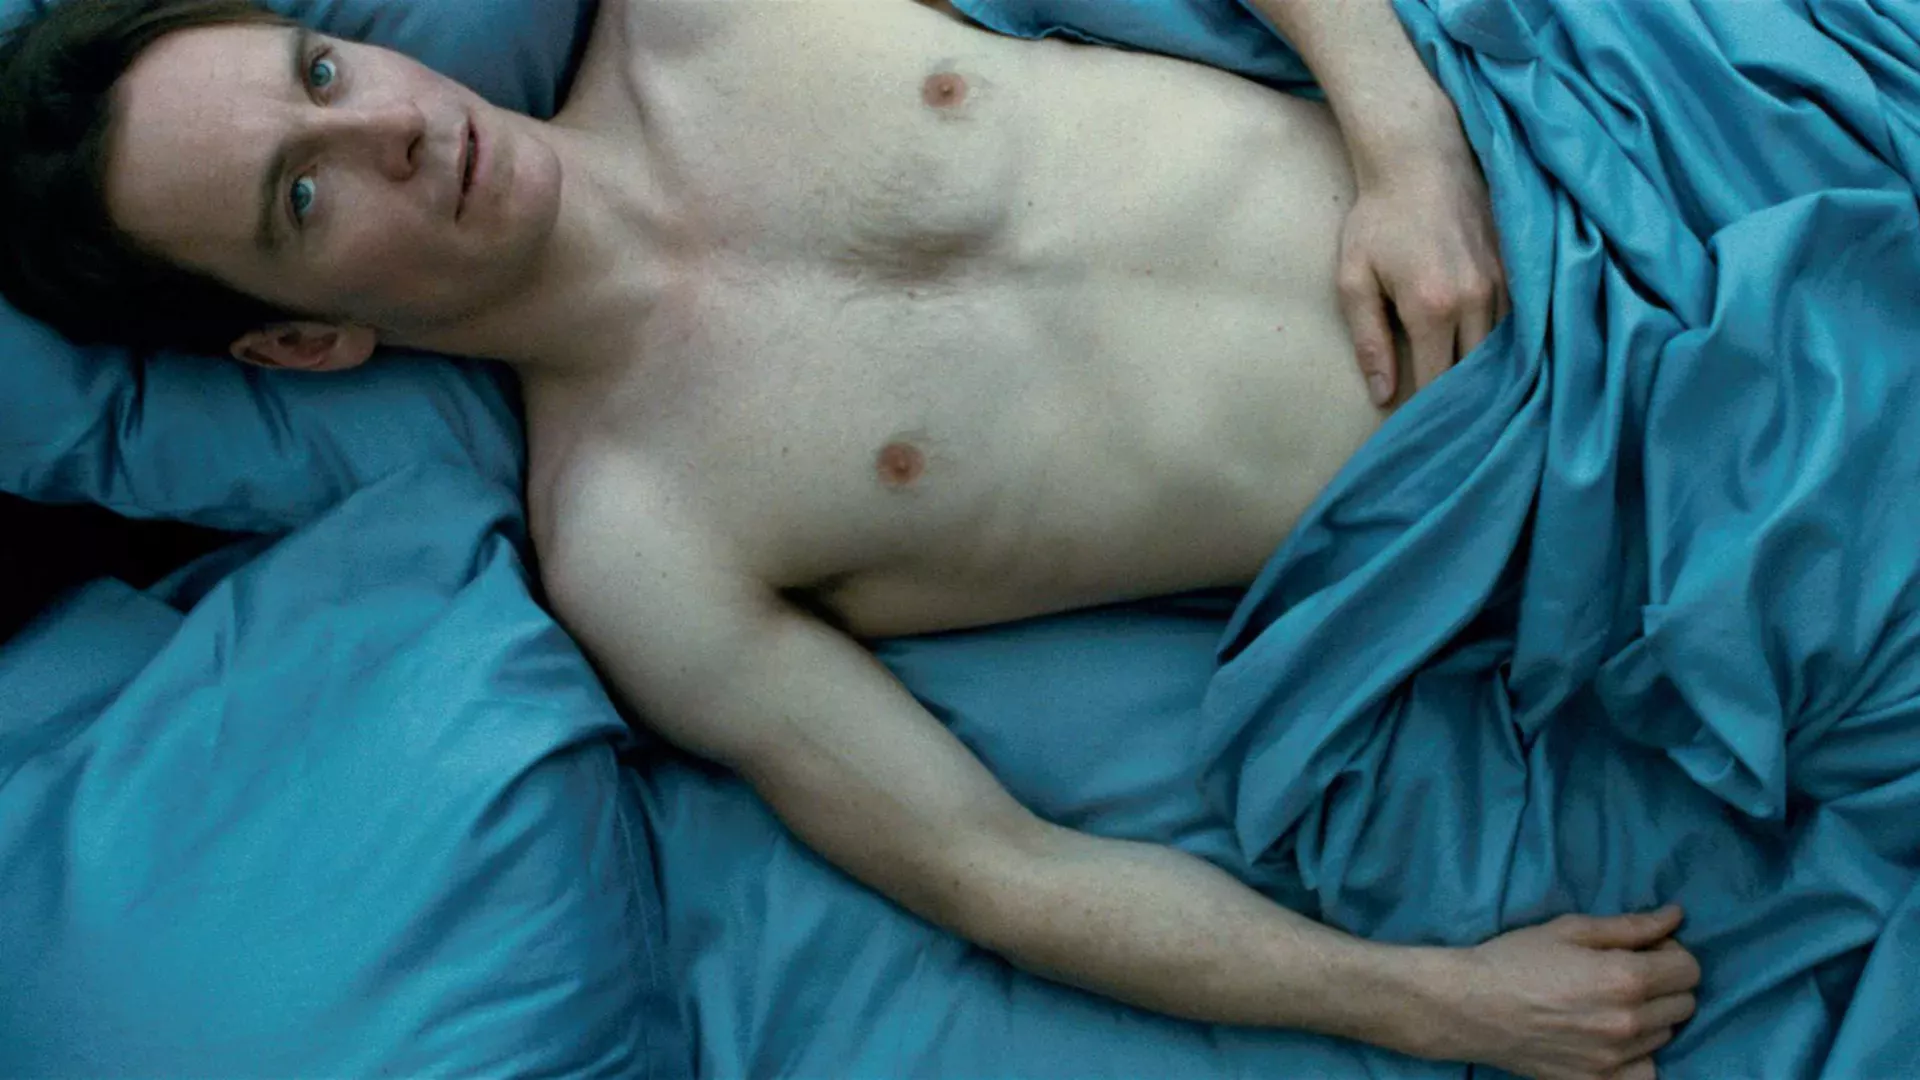 Michael Fassbender laying in bed shirtless. He is covered by blue sheets. 